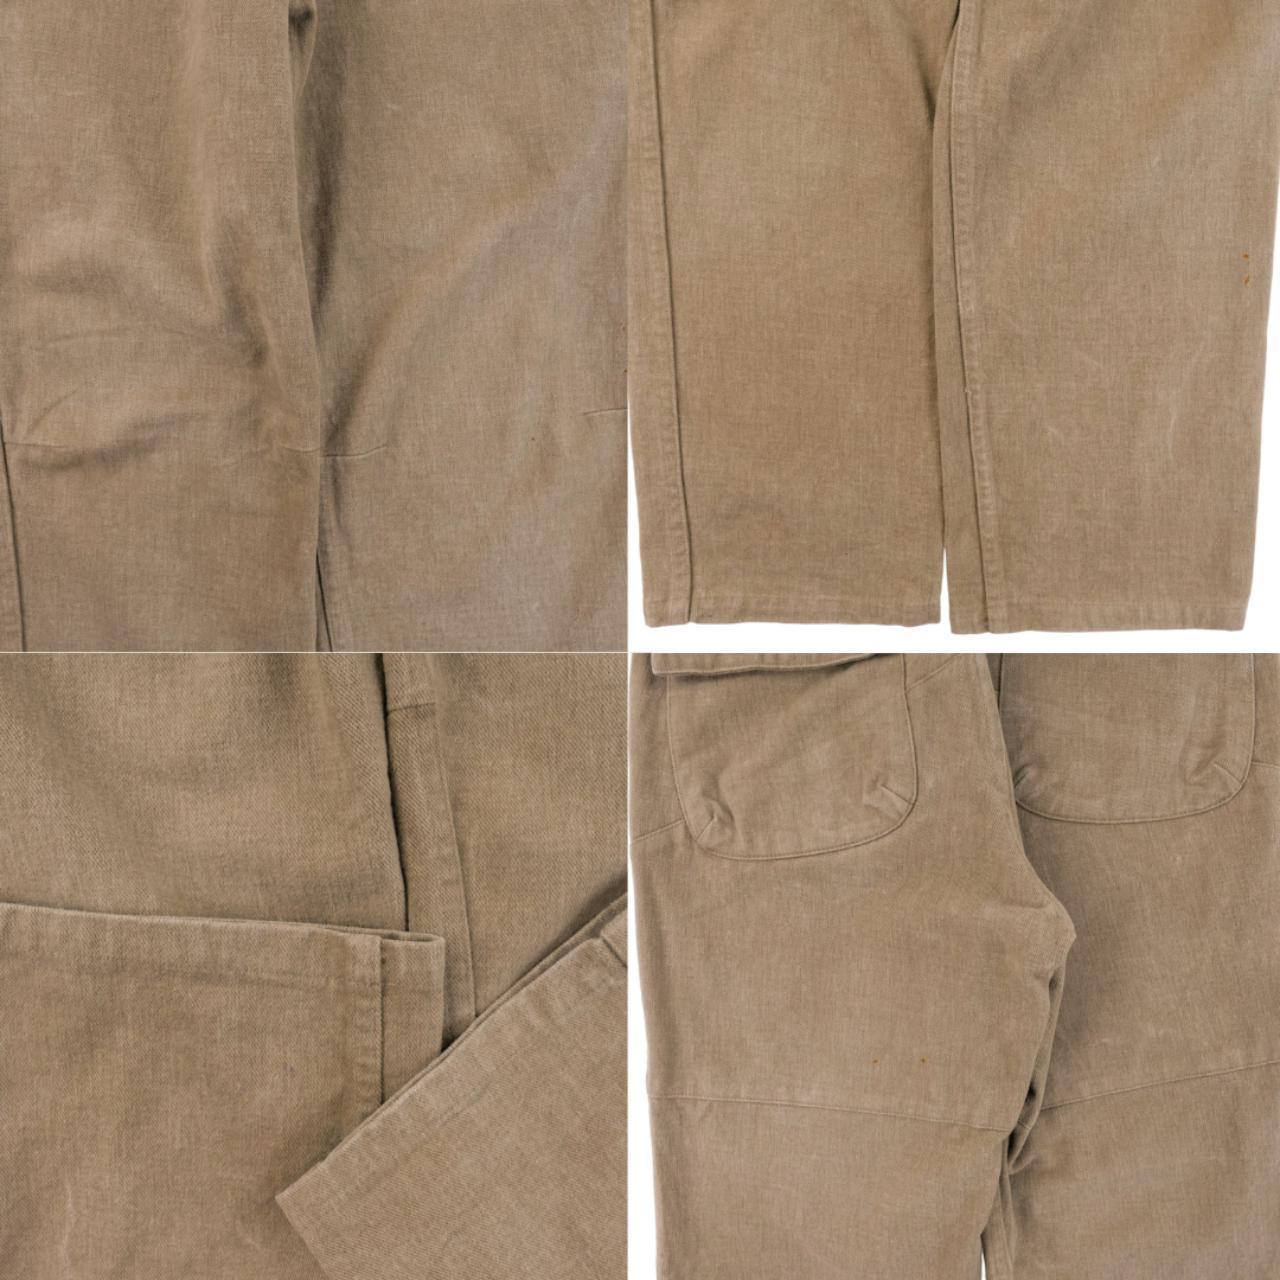 Vintage Engineered Garments Trousers Size W27 - Known Source